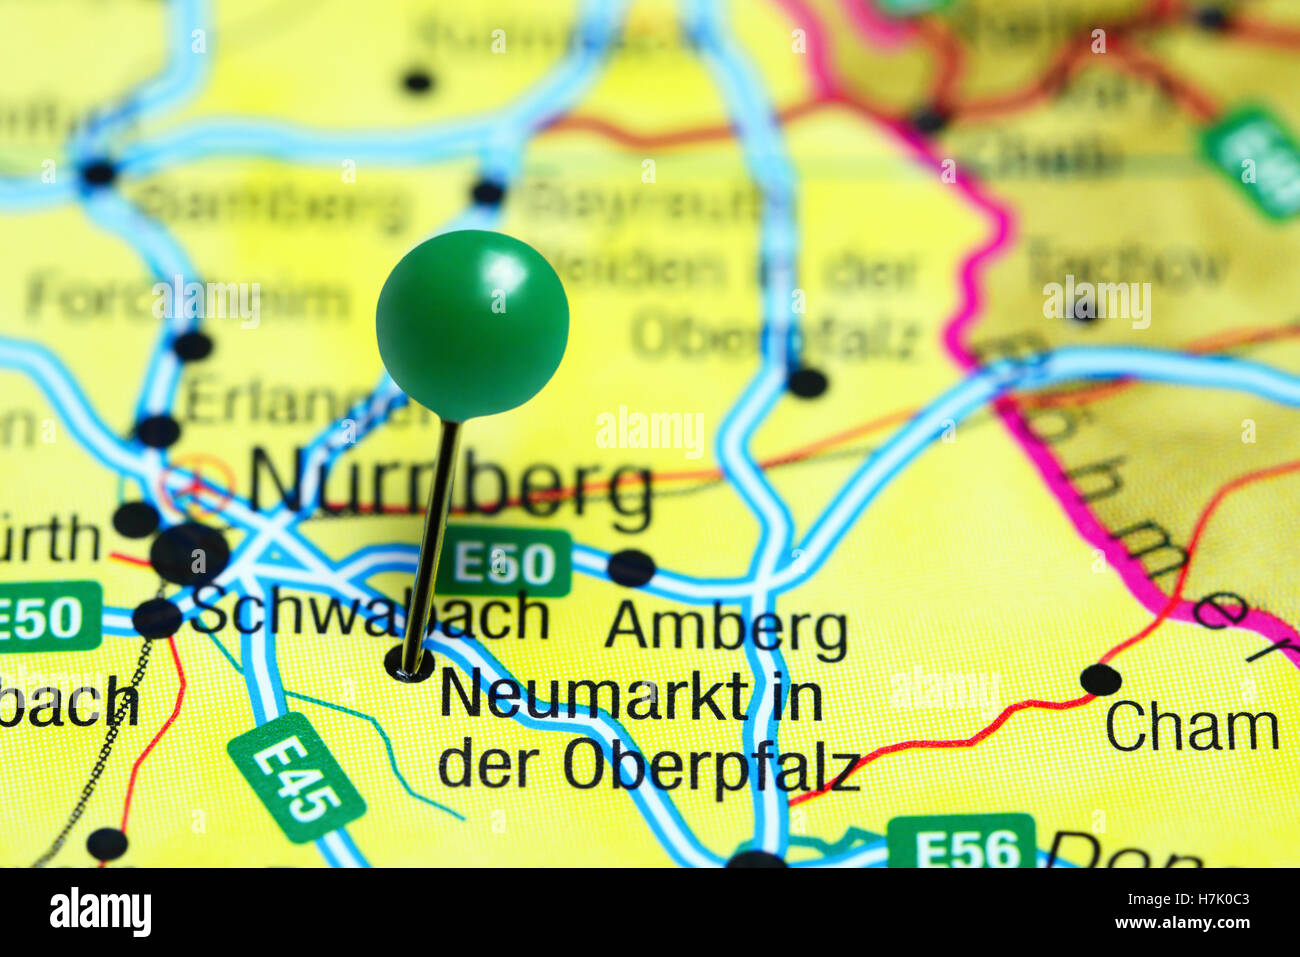 Neumarkt in der Oberpfalz pinned on a map of Germany Stock Photo